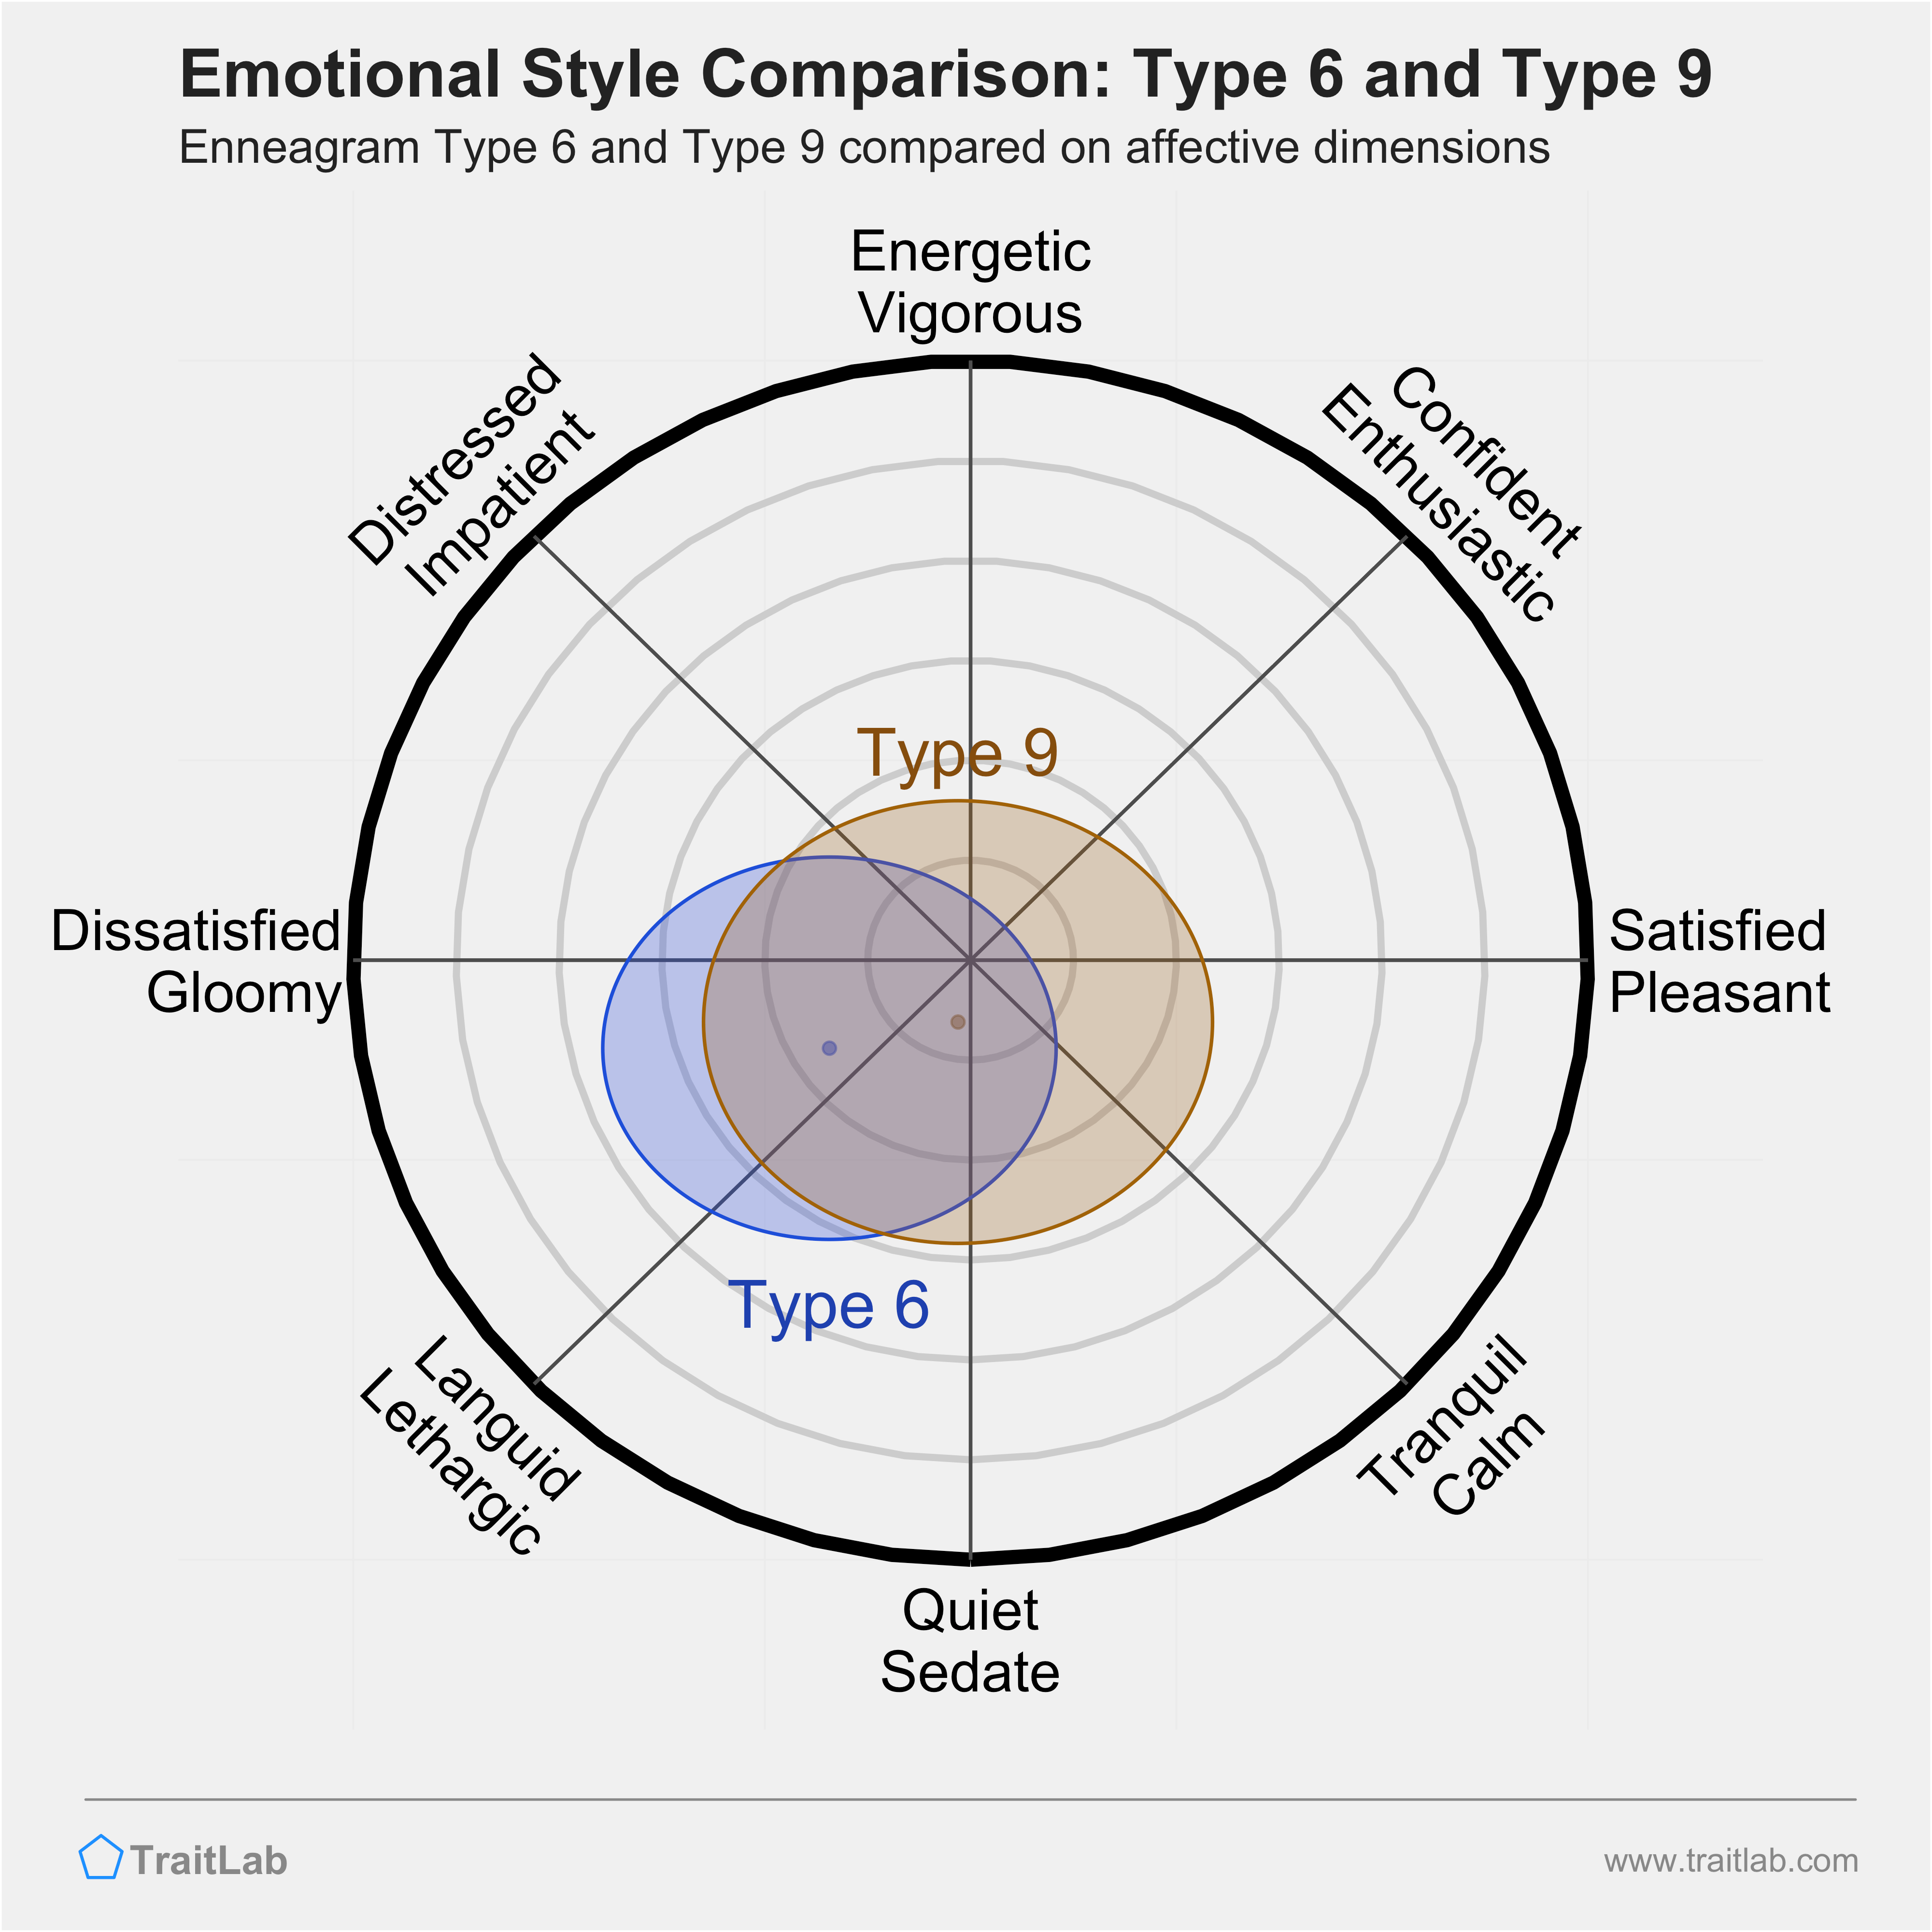 Type 6 and Type 9 comparison across emotional (affective) dimensions